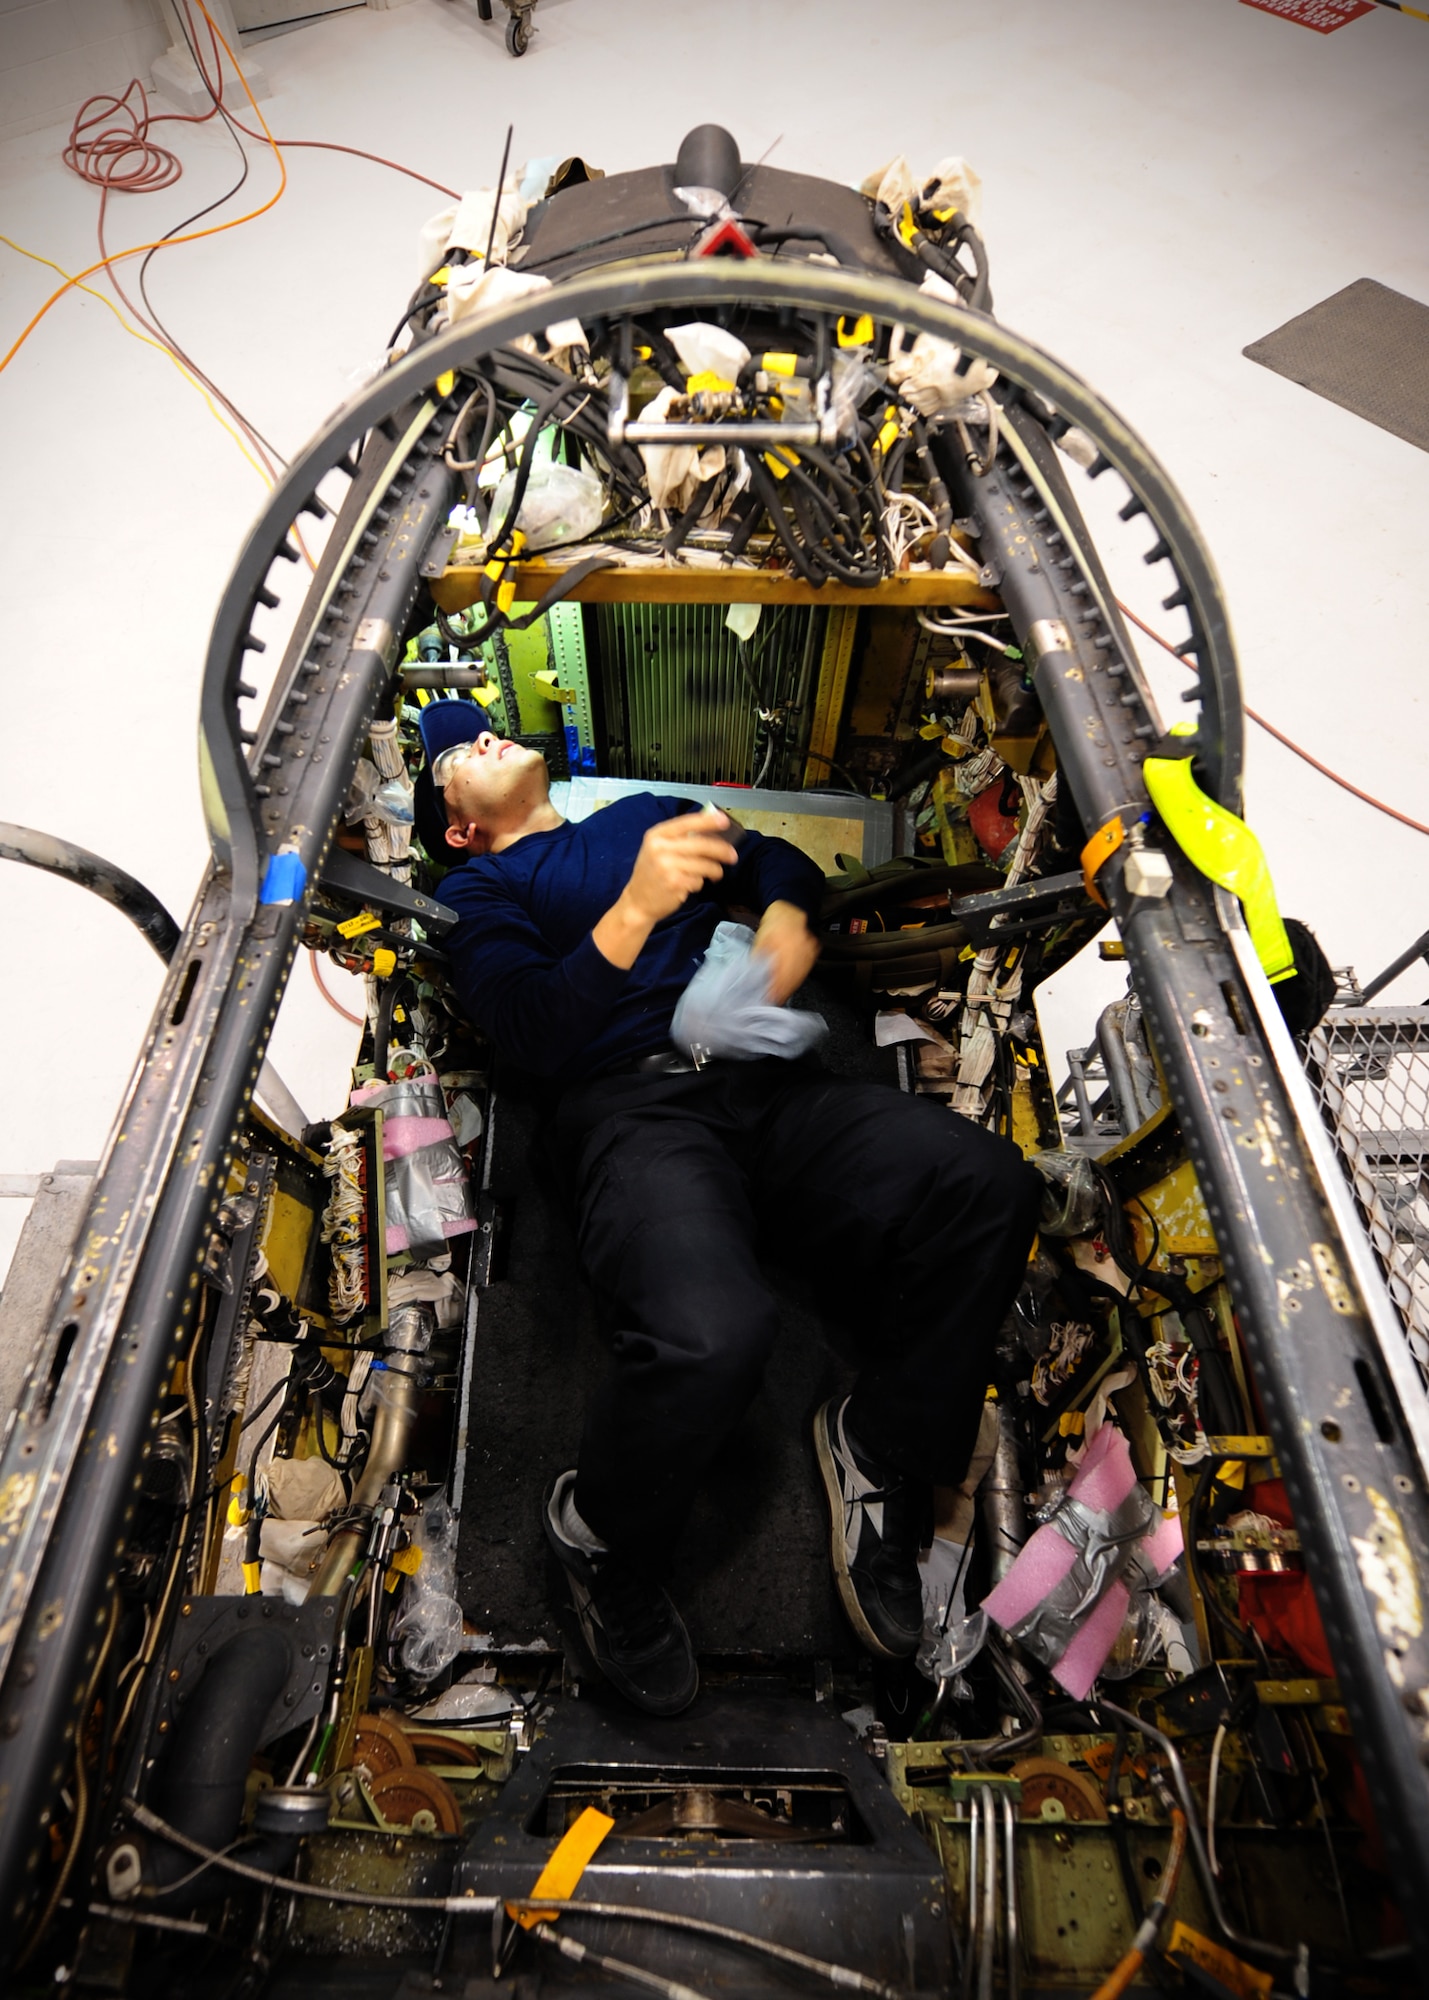 Ron Springer, Lockheed Martin aircraft structure mechanic, checks the inside of a cockpit of a U-2 intelligence, surveillance and reconnaissance aircraft, at Beale Air Force Base, Calif., Feb. 14, 2013. Lockheed mechanics are working on Cockpit Altitude Reduction Effort modifications to retrofit the older design of the U-2 cockpit for pilot safety. (U.S. Air Force photo by Senior Airman Shawn Nickel/Released)